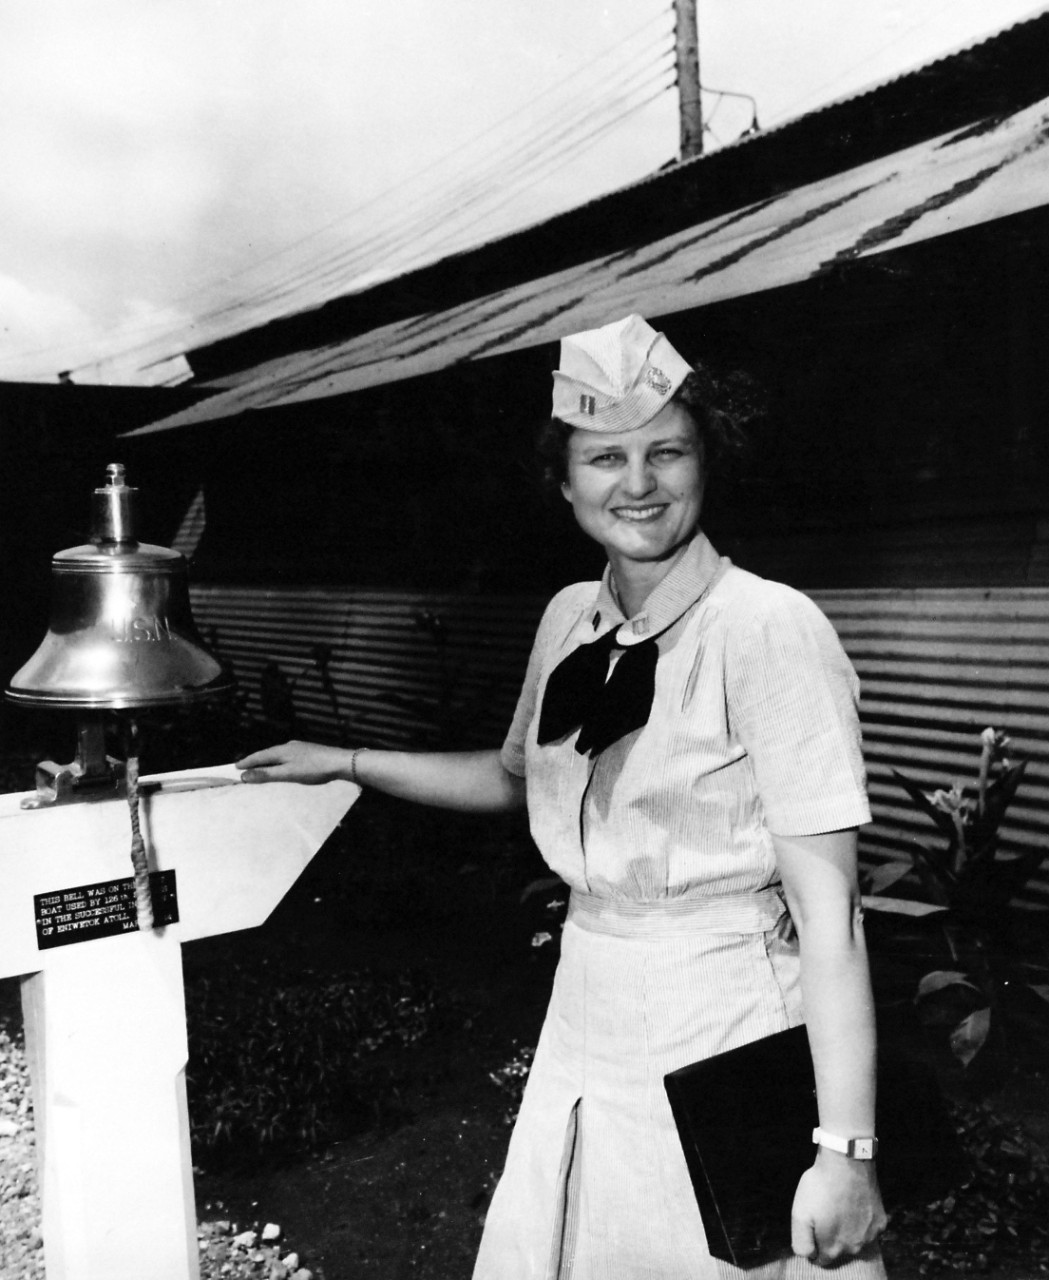 80-G-49770:  Working Uniform, July 1945.   Lieutenant Francis Rich beside ship’s bell presented to WAVES by a Seabee Battalion, Pearl Harbor, Territory of Hawaii.  Released July 2, 1945.   Official U.S. Navy photograph, now in the collections of the National Archives.  